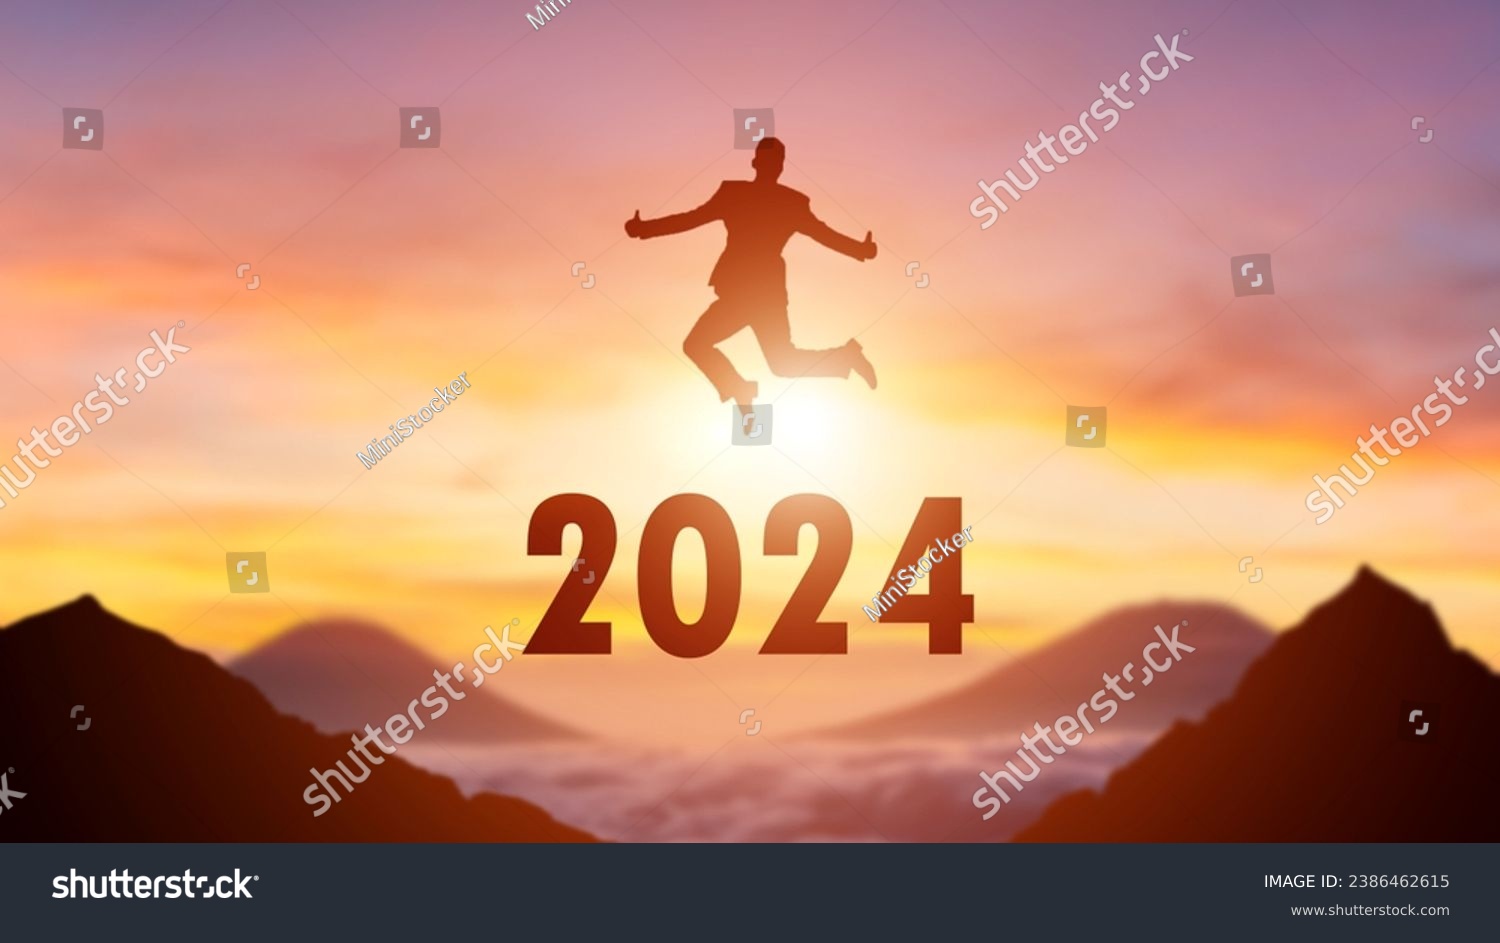 Silhouette of a person leaping from 2023 to 2024 on the top of the mountain background. Happy New Year and Christmas day concept. #2386462615